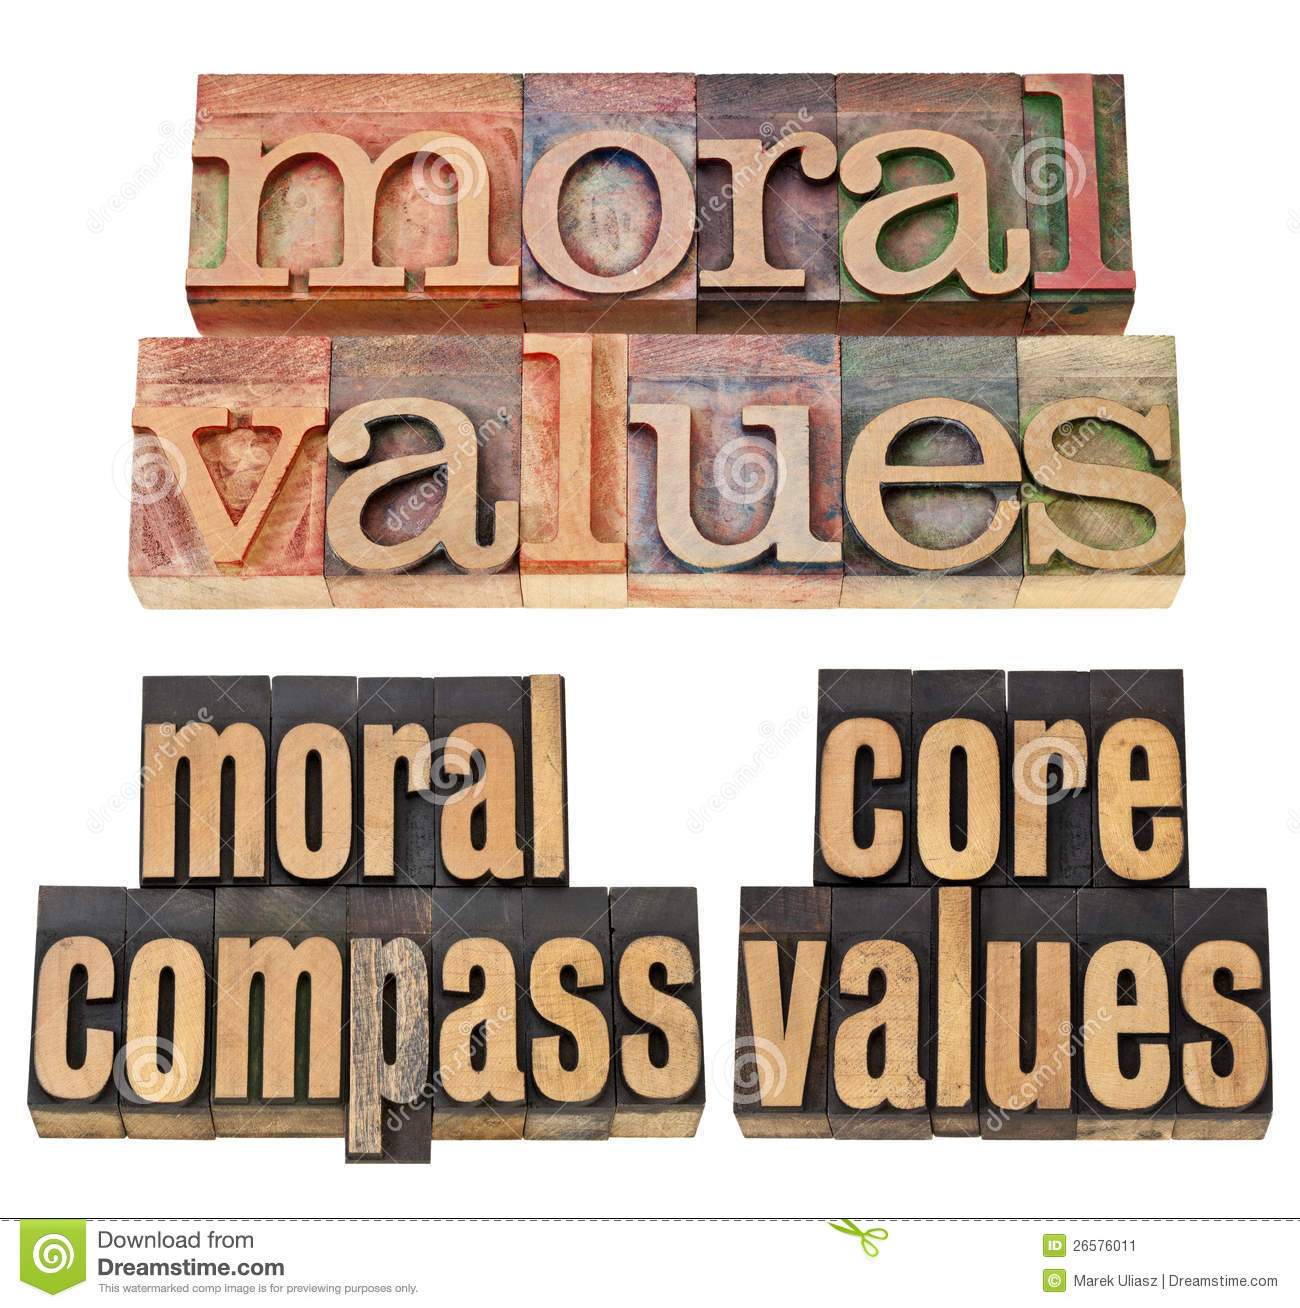 Moral Values Moral Compass Core Values   Ethics Concept   A Collage